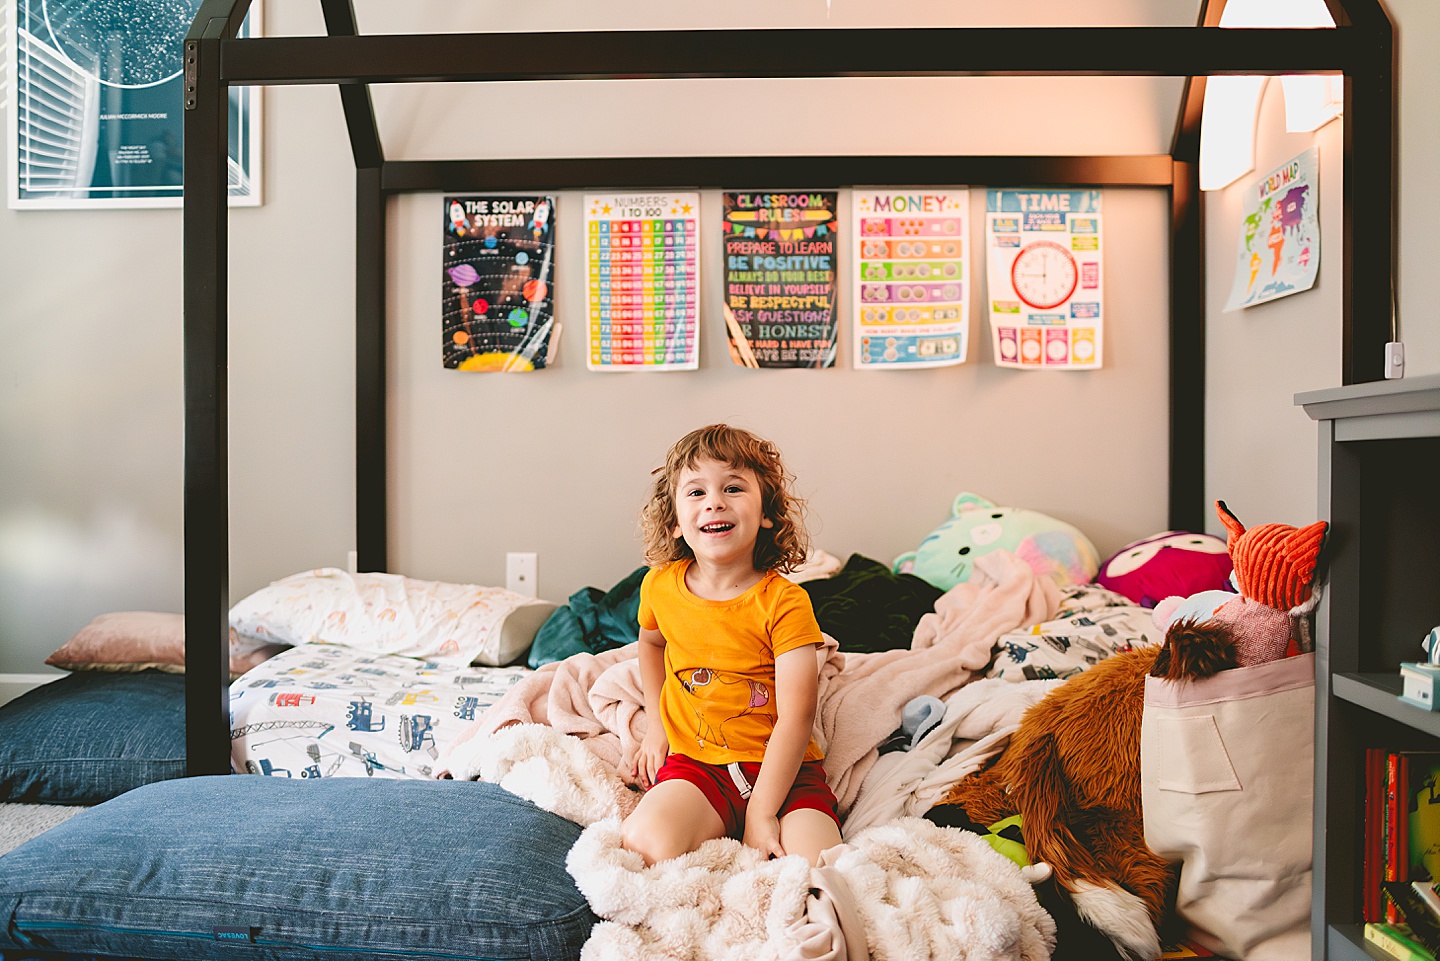 Child in his room surrounded by stuffed animals